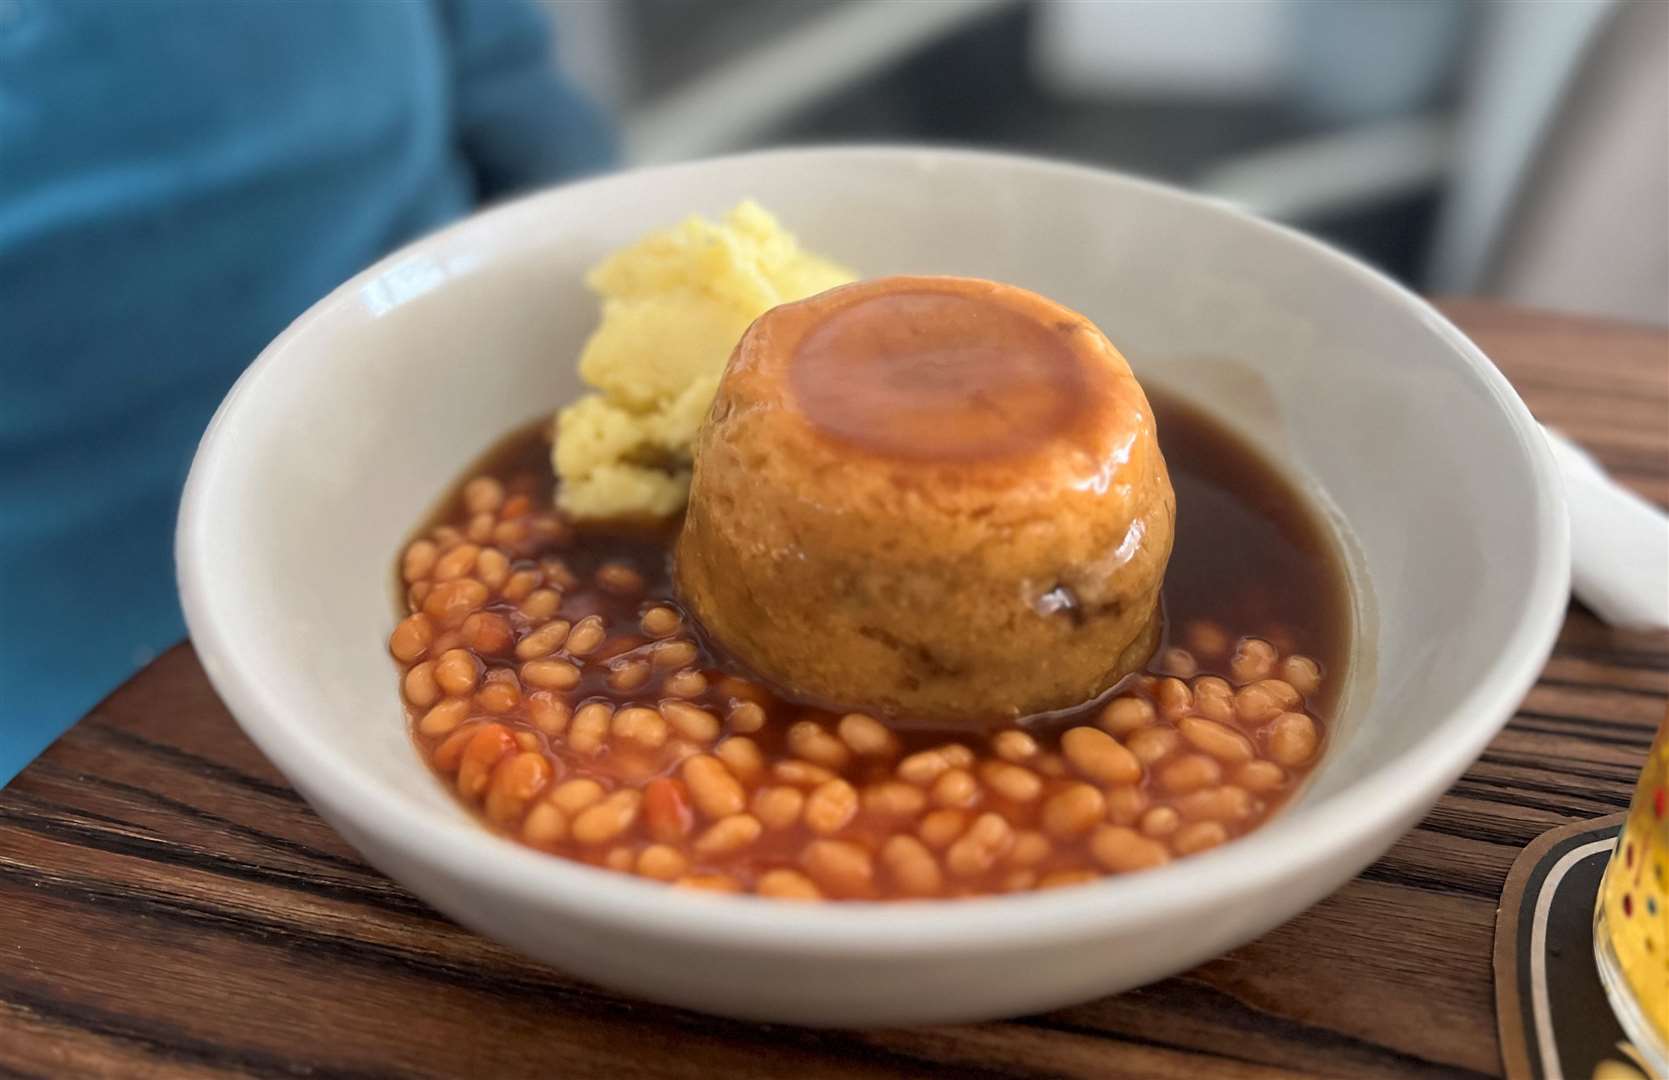 The steak and kidney suet pudding perched within a sea of baked beans